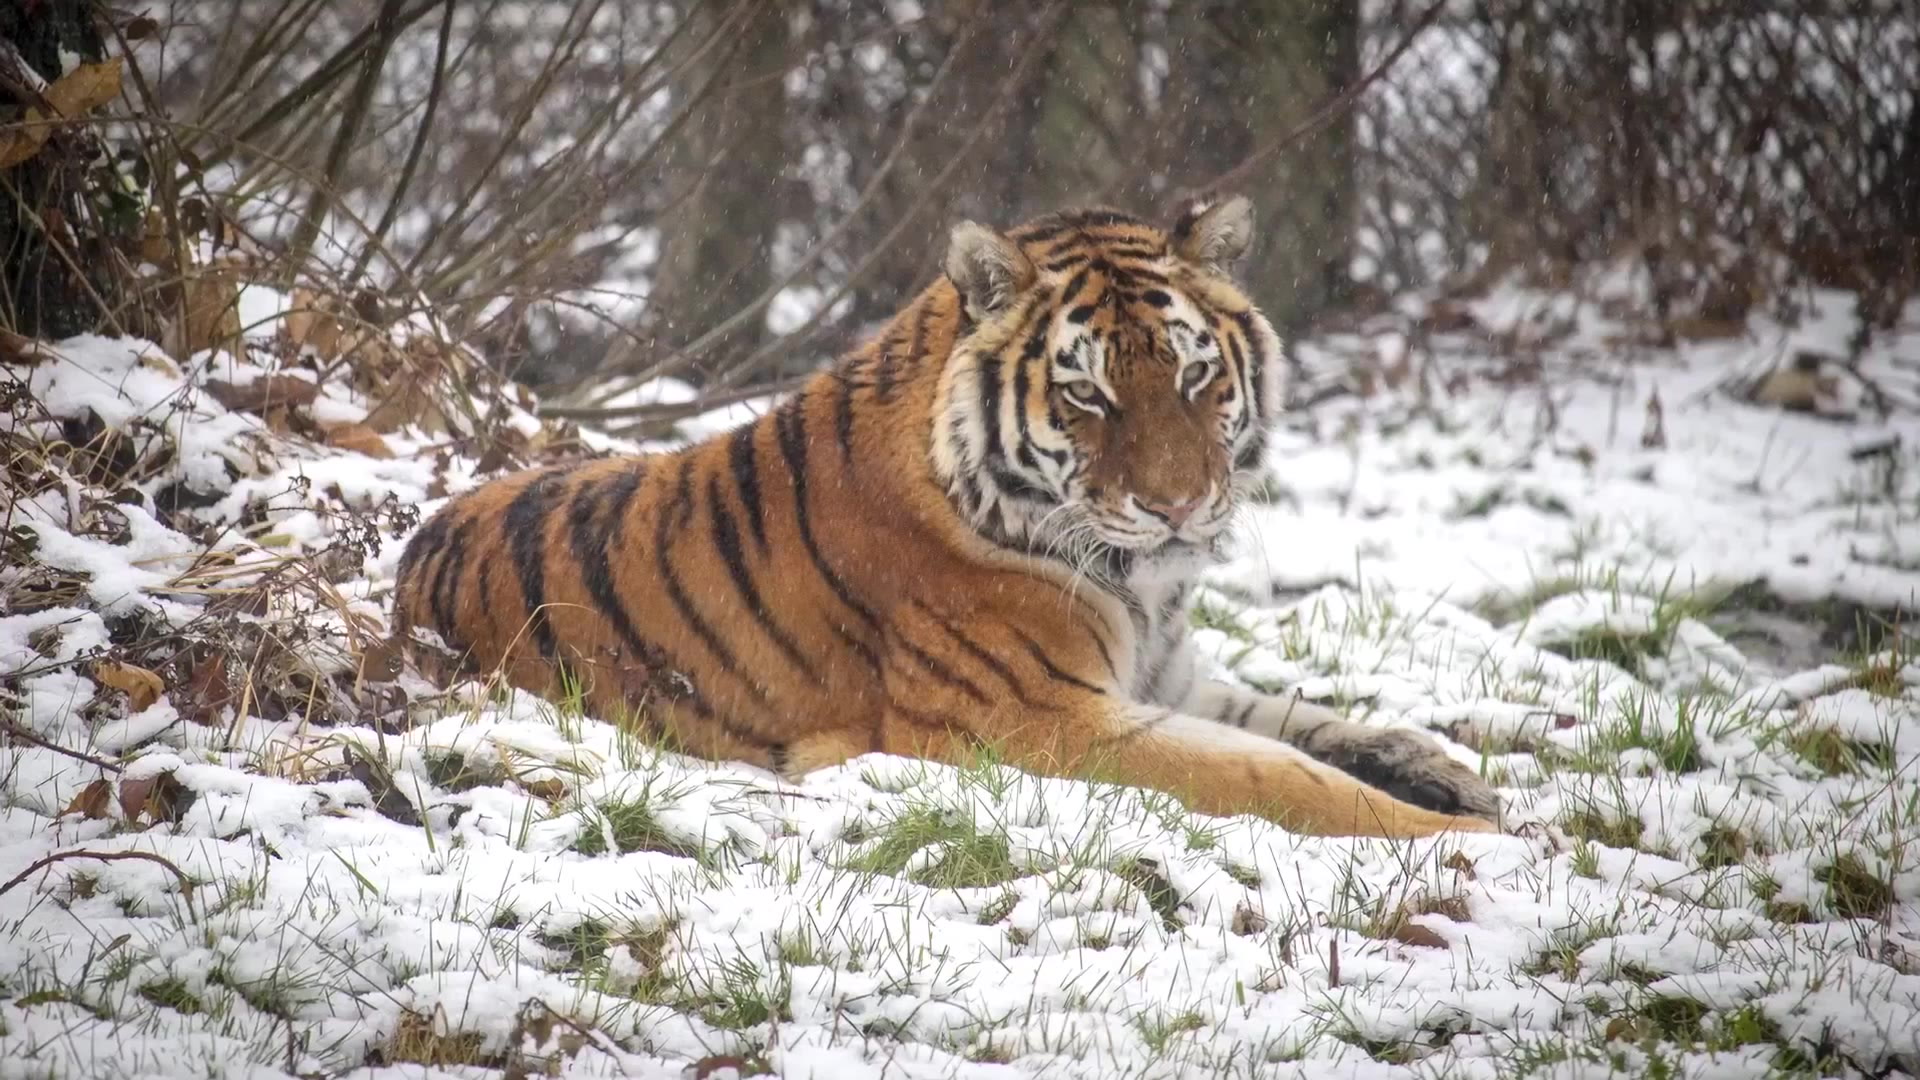 Animals at UK safari park wake up to snowy conditions | Lifestyle |  Independent TV